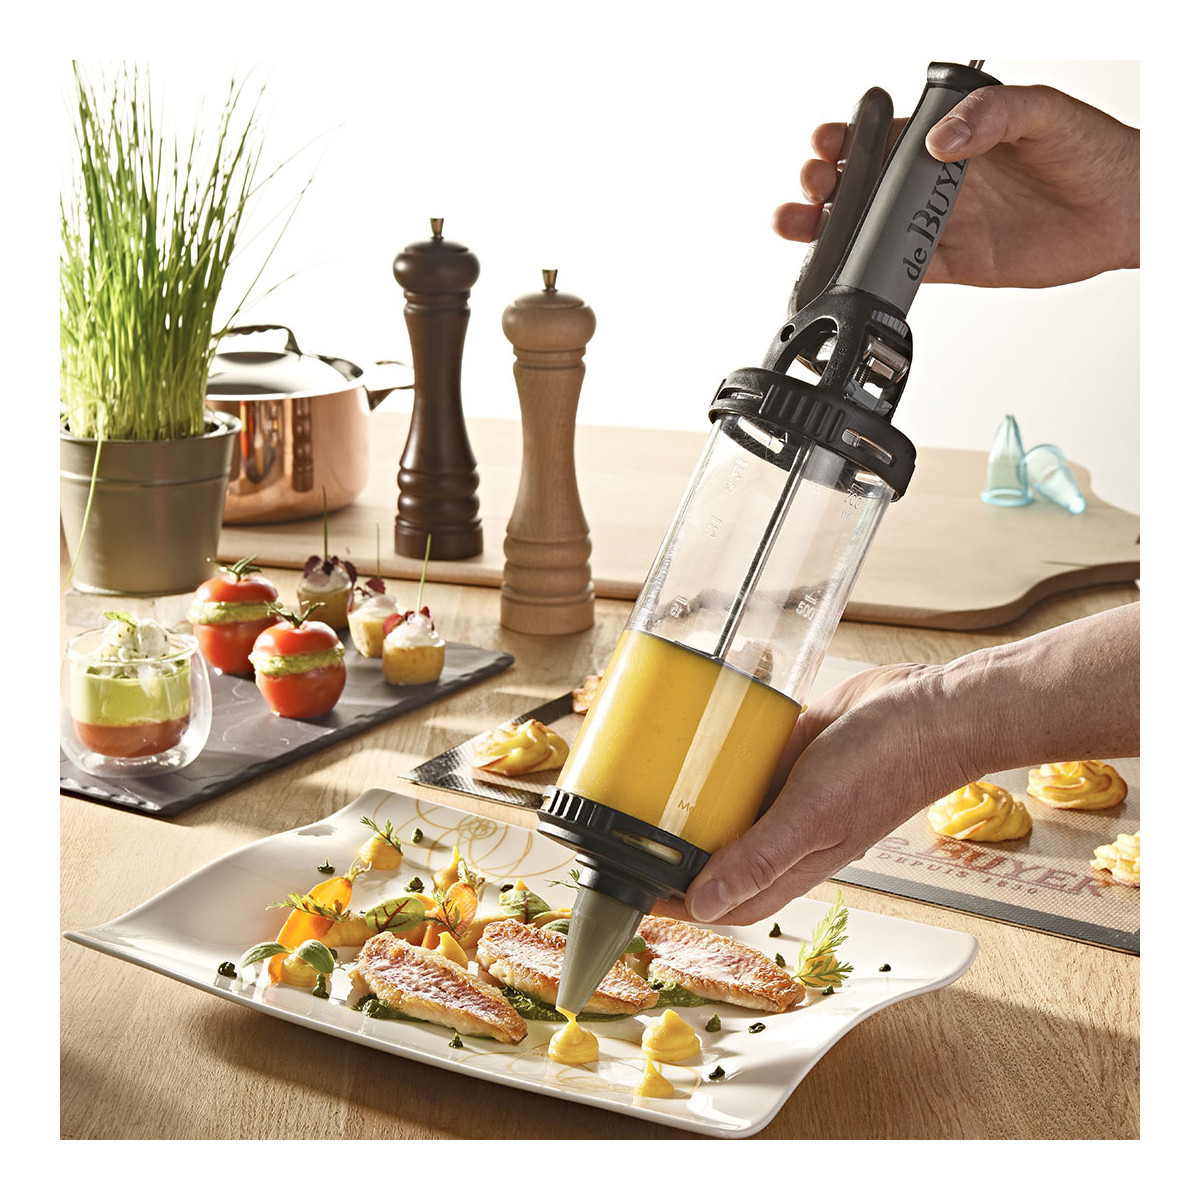 de Buyer  Le Tube Pro Pastry Press and Food Dispenser — Athens Cooks